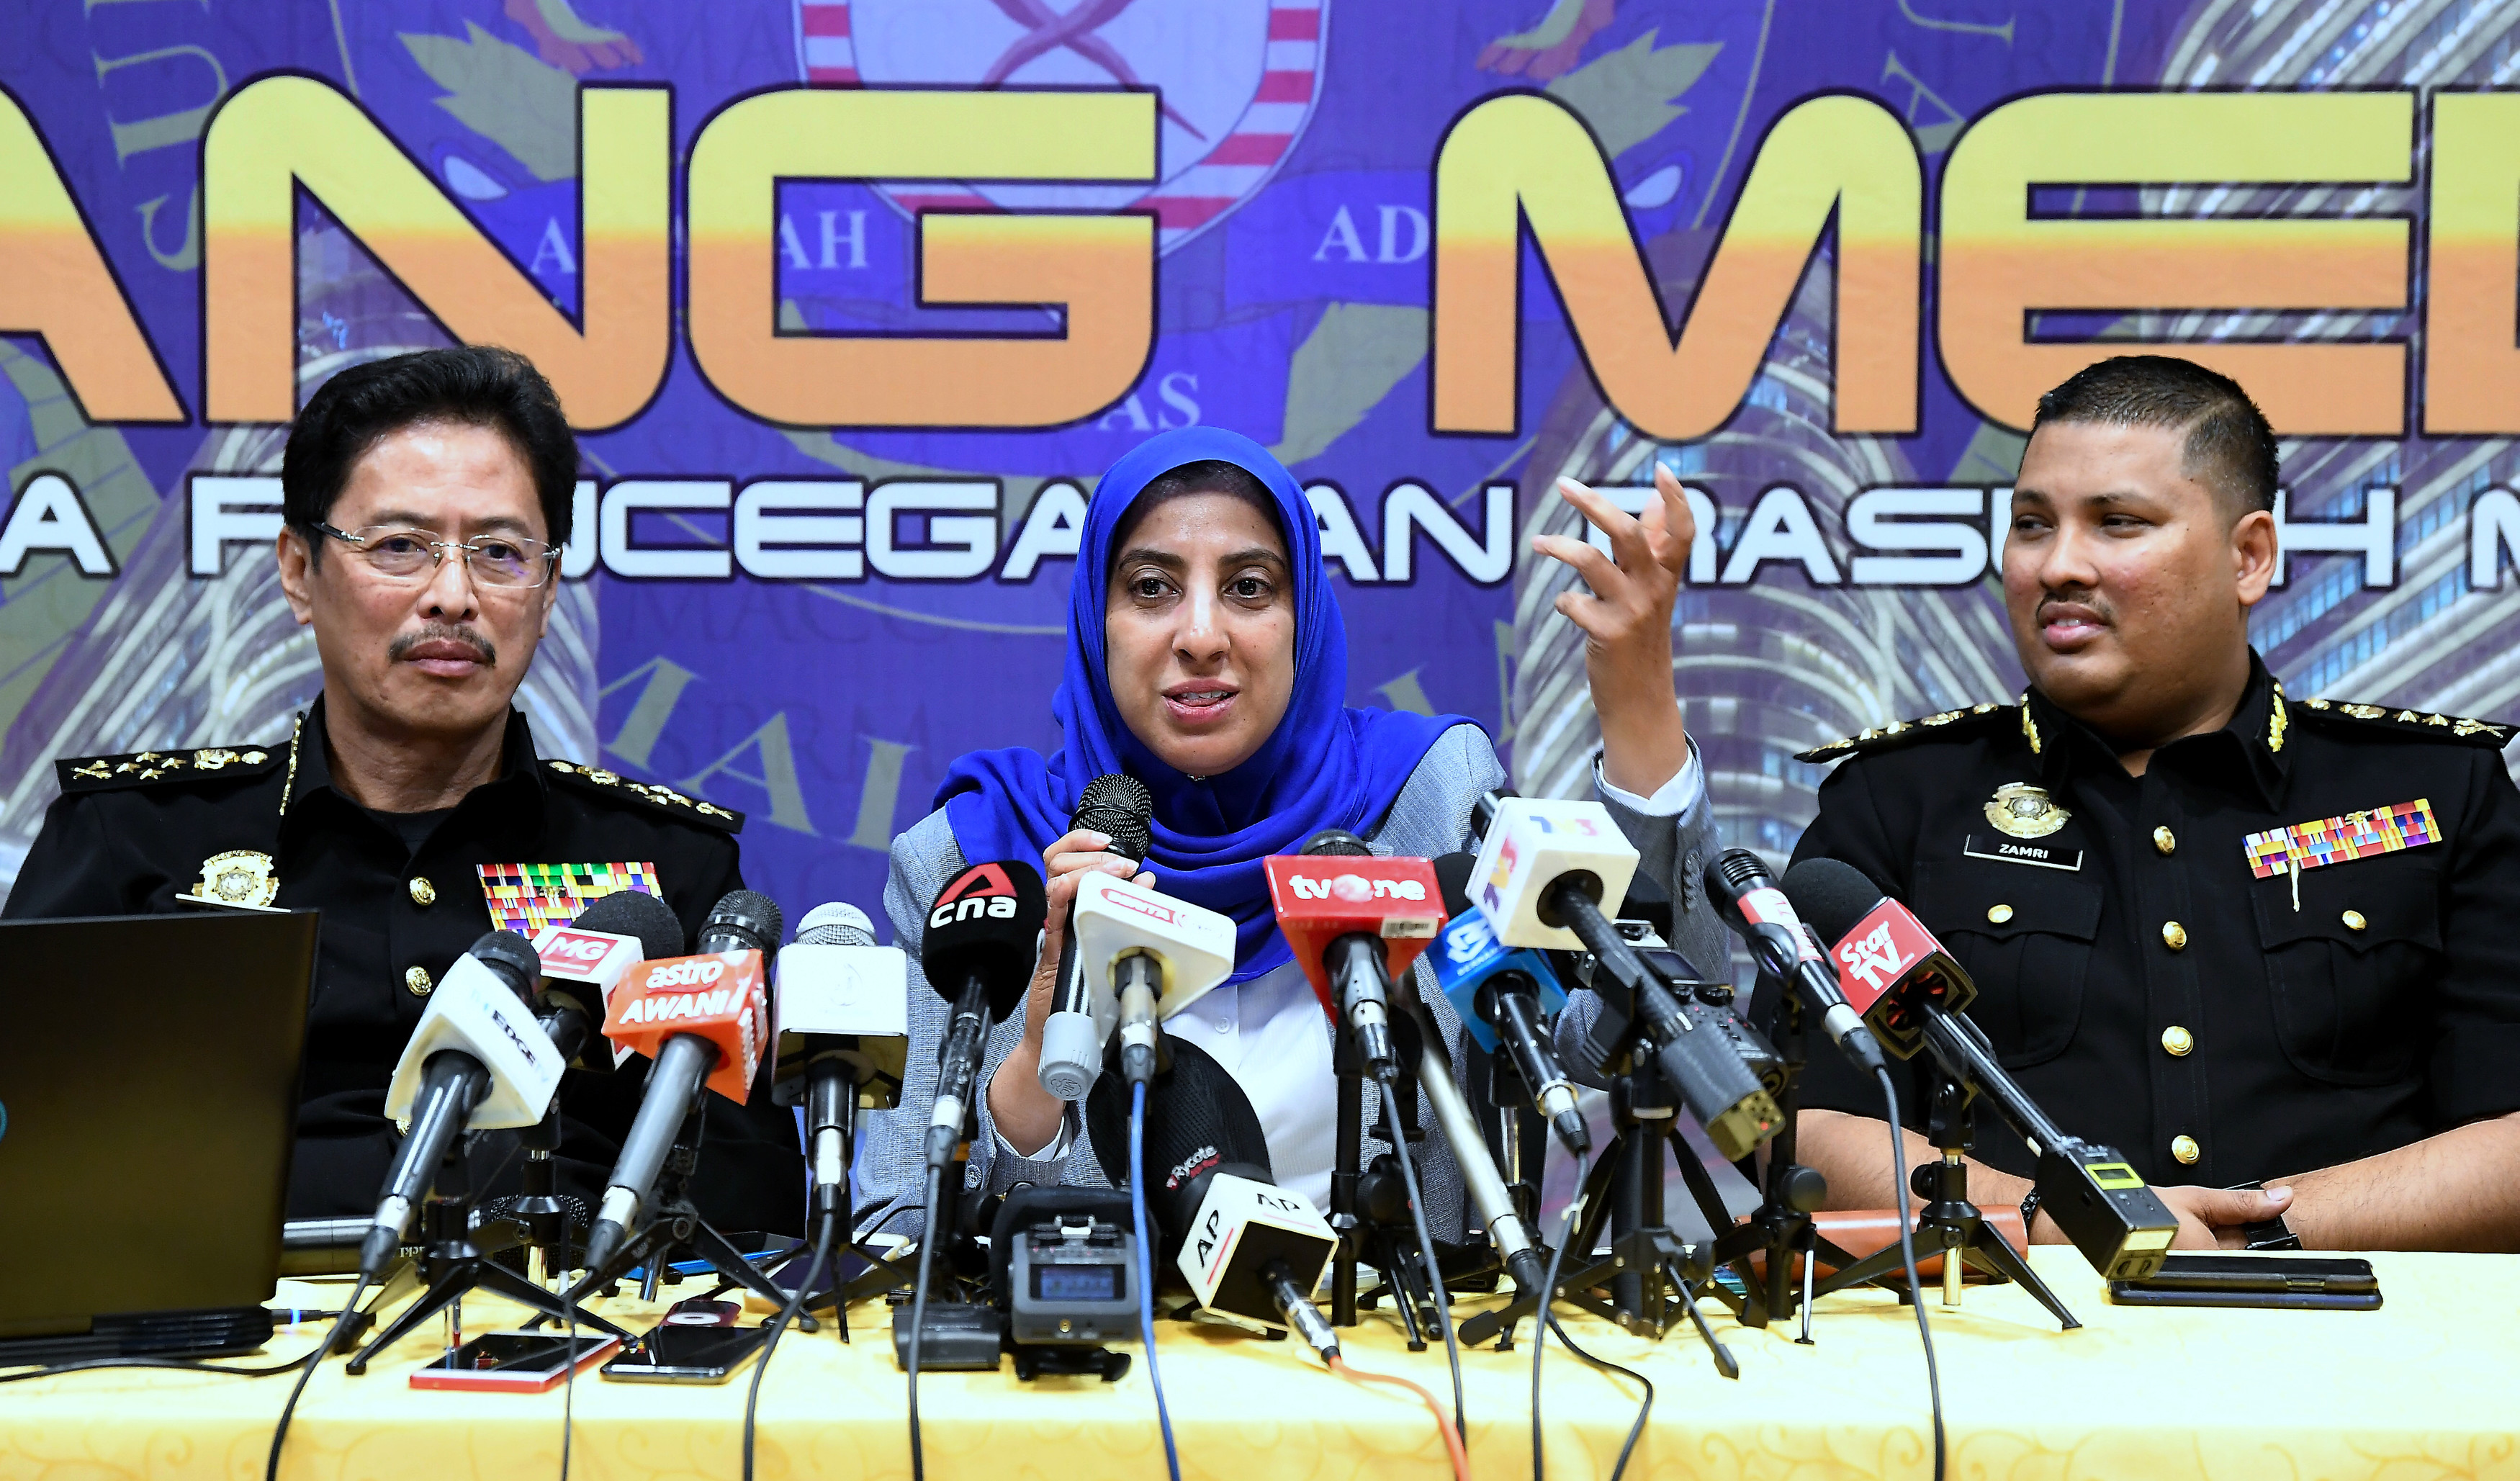 MACC files police report over criminal plot to smear its reputation